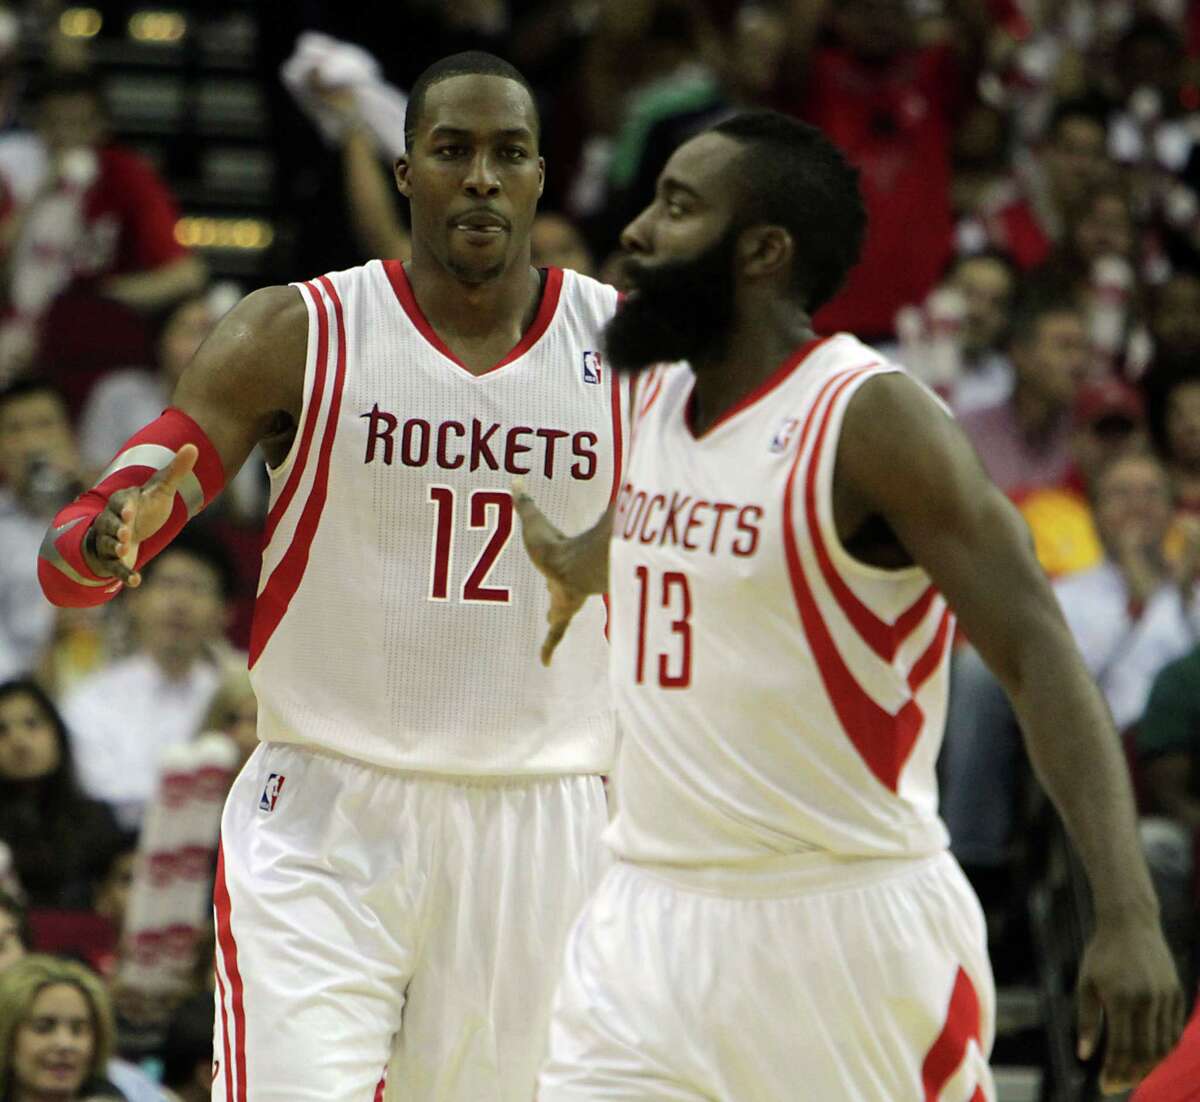 James Harden named to First-Team All-NBA, Goran Dragic of